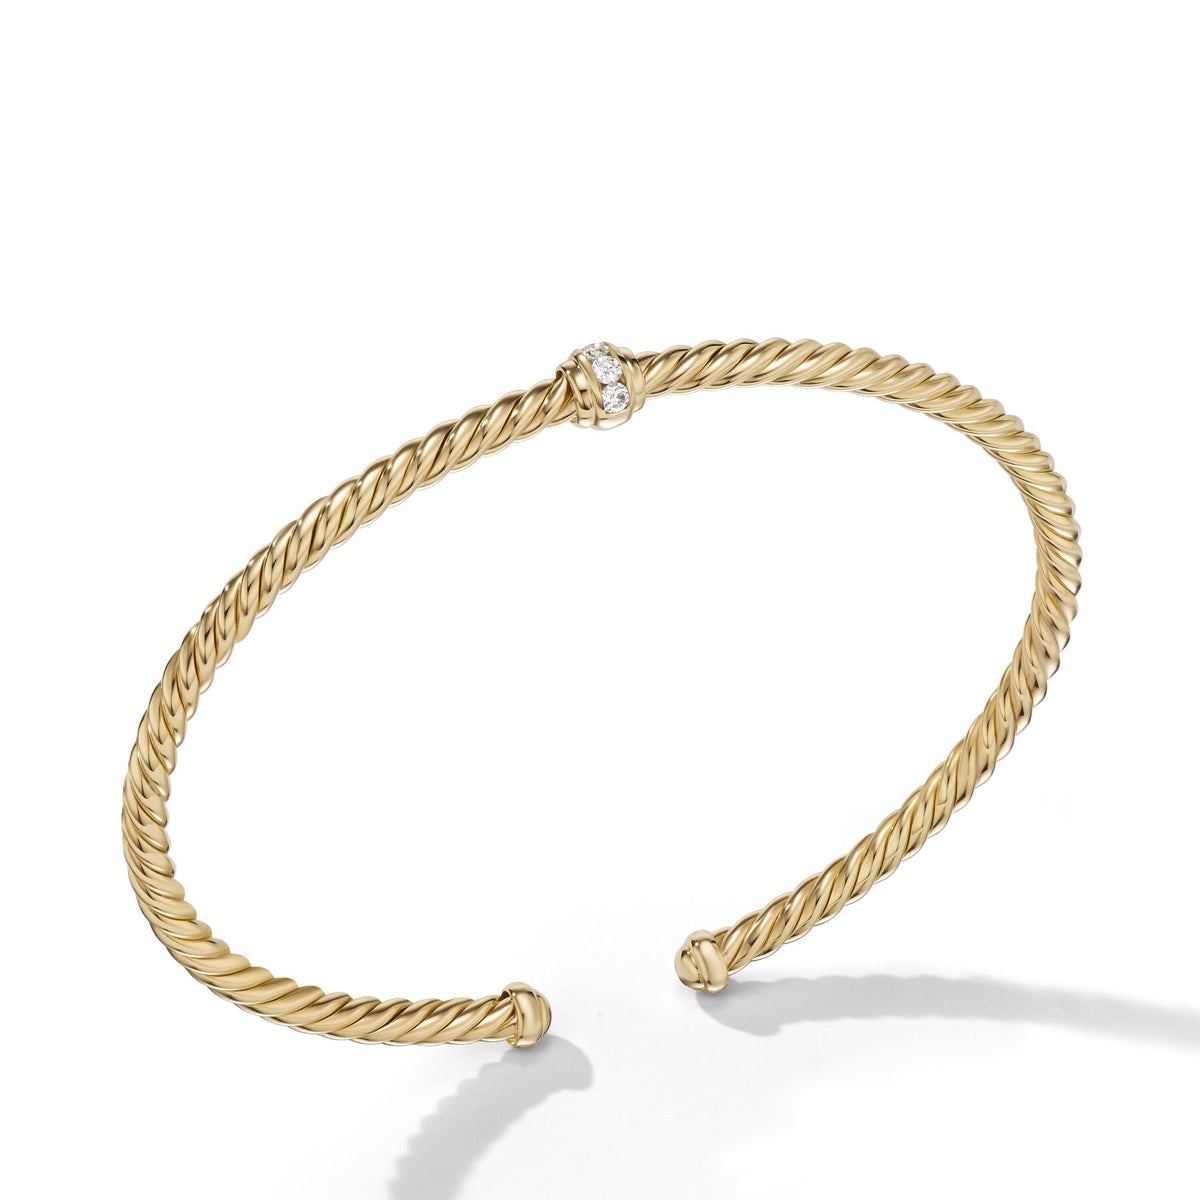 Cable Classics Center Station Bracelet in 18K Yellow Gold with Pavé Diamonds